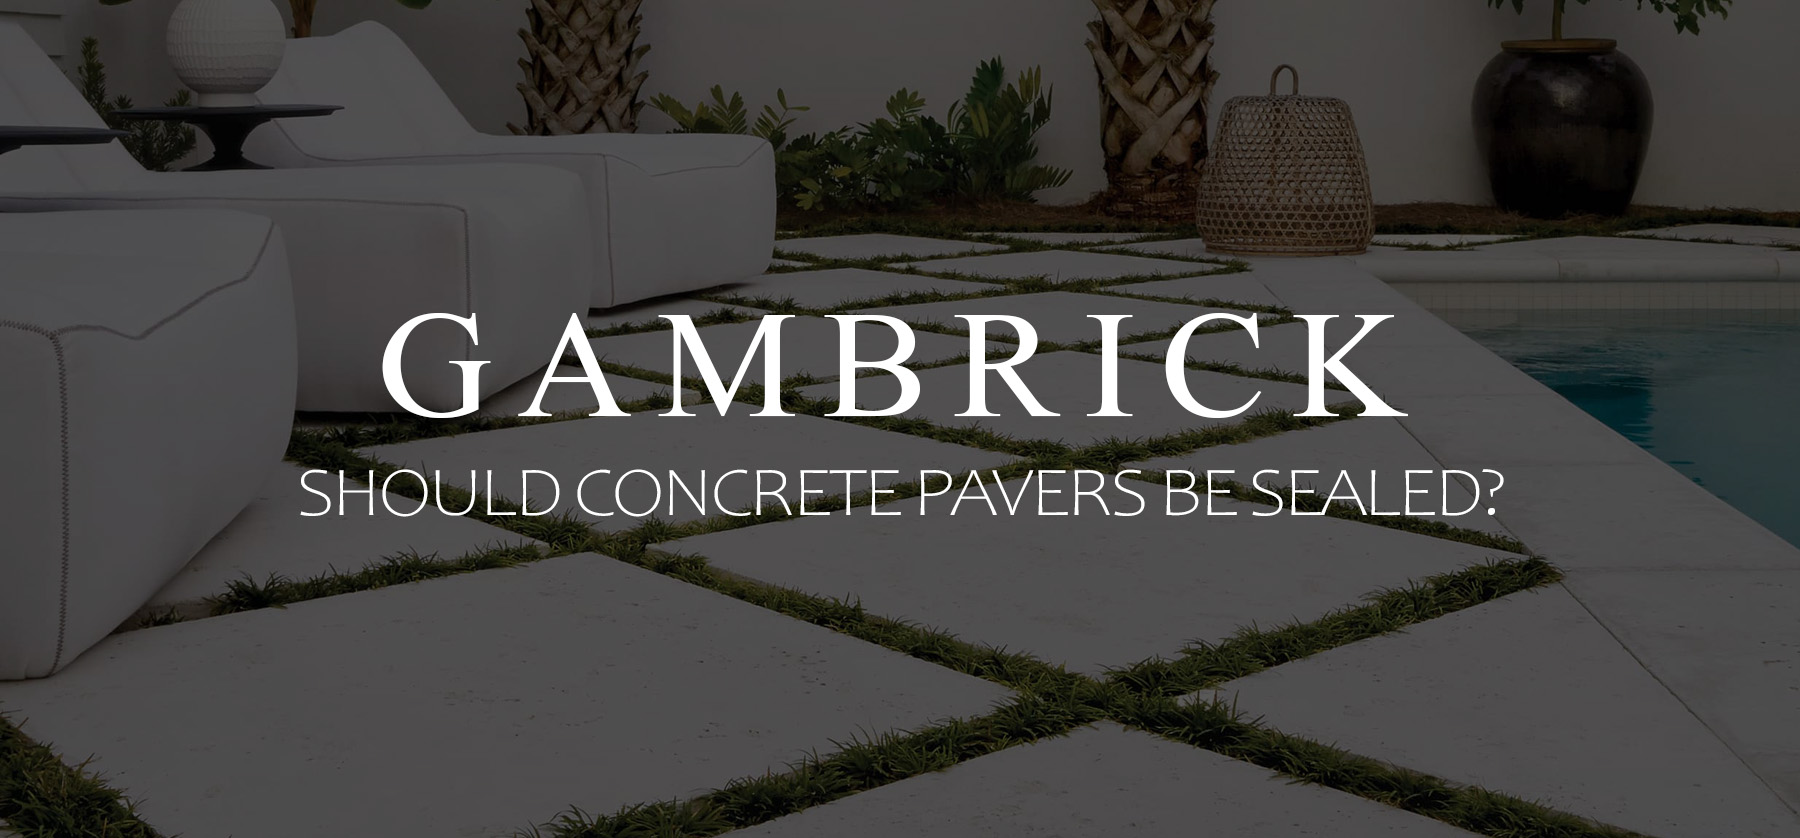 should concrete pavers be sealed banner pic